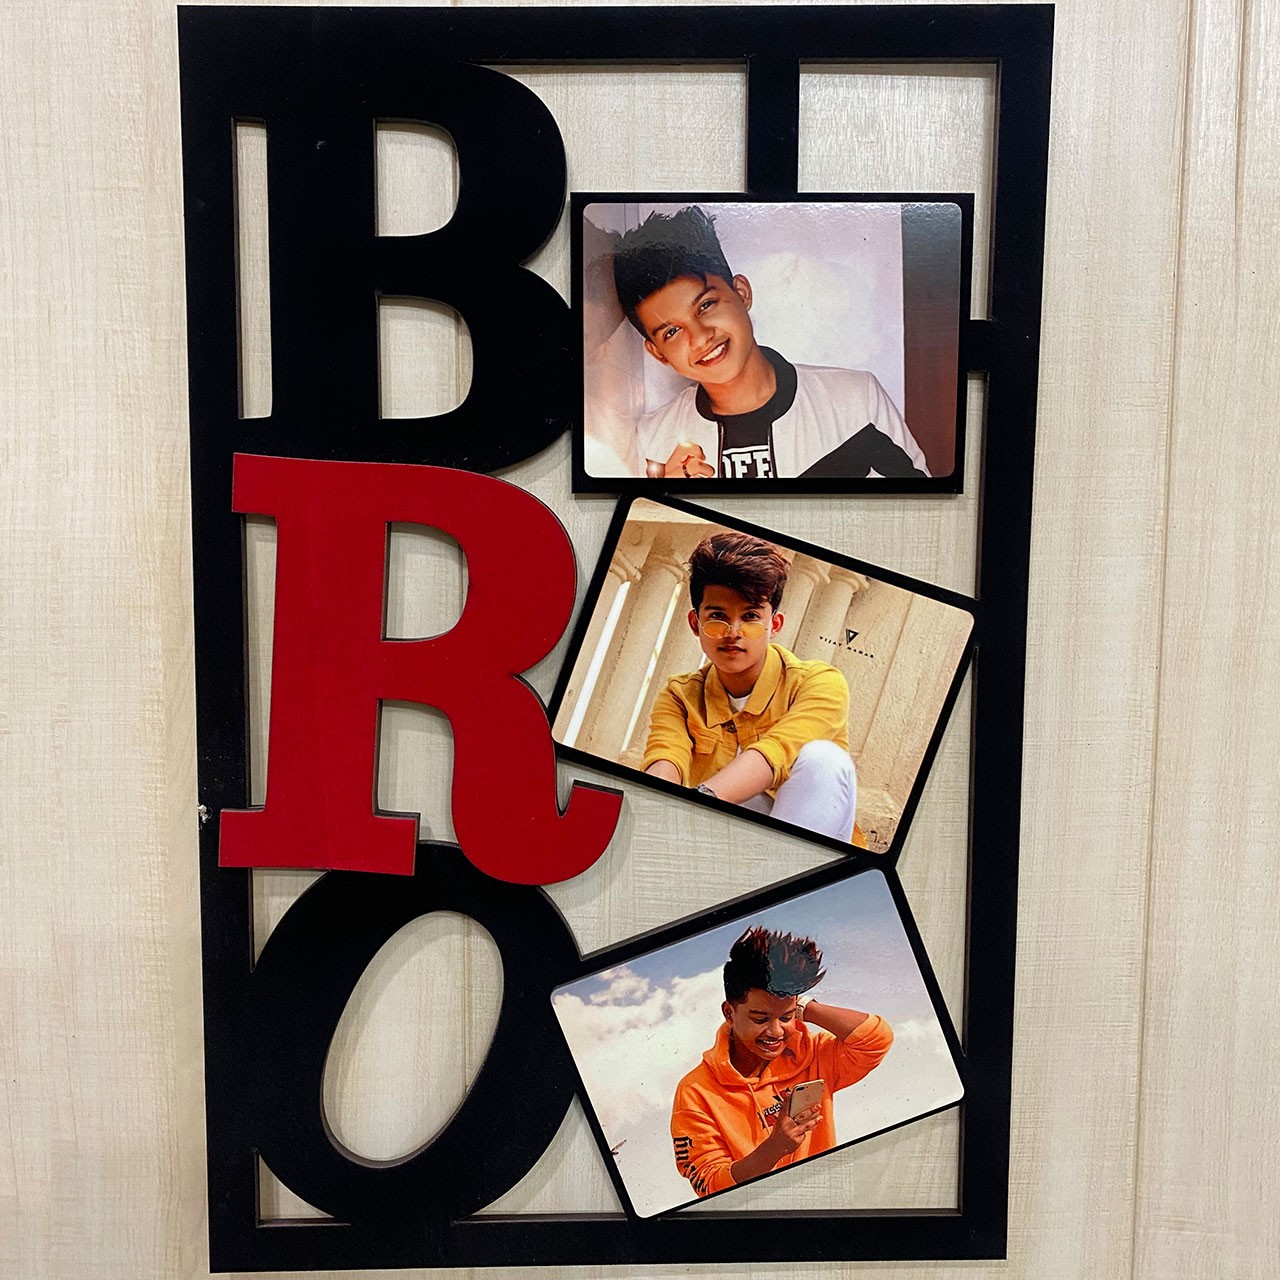 Personalized Bro Wooden Wall Frame